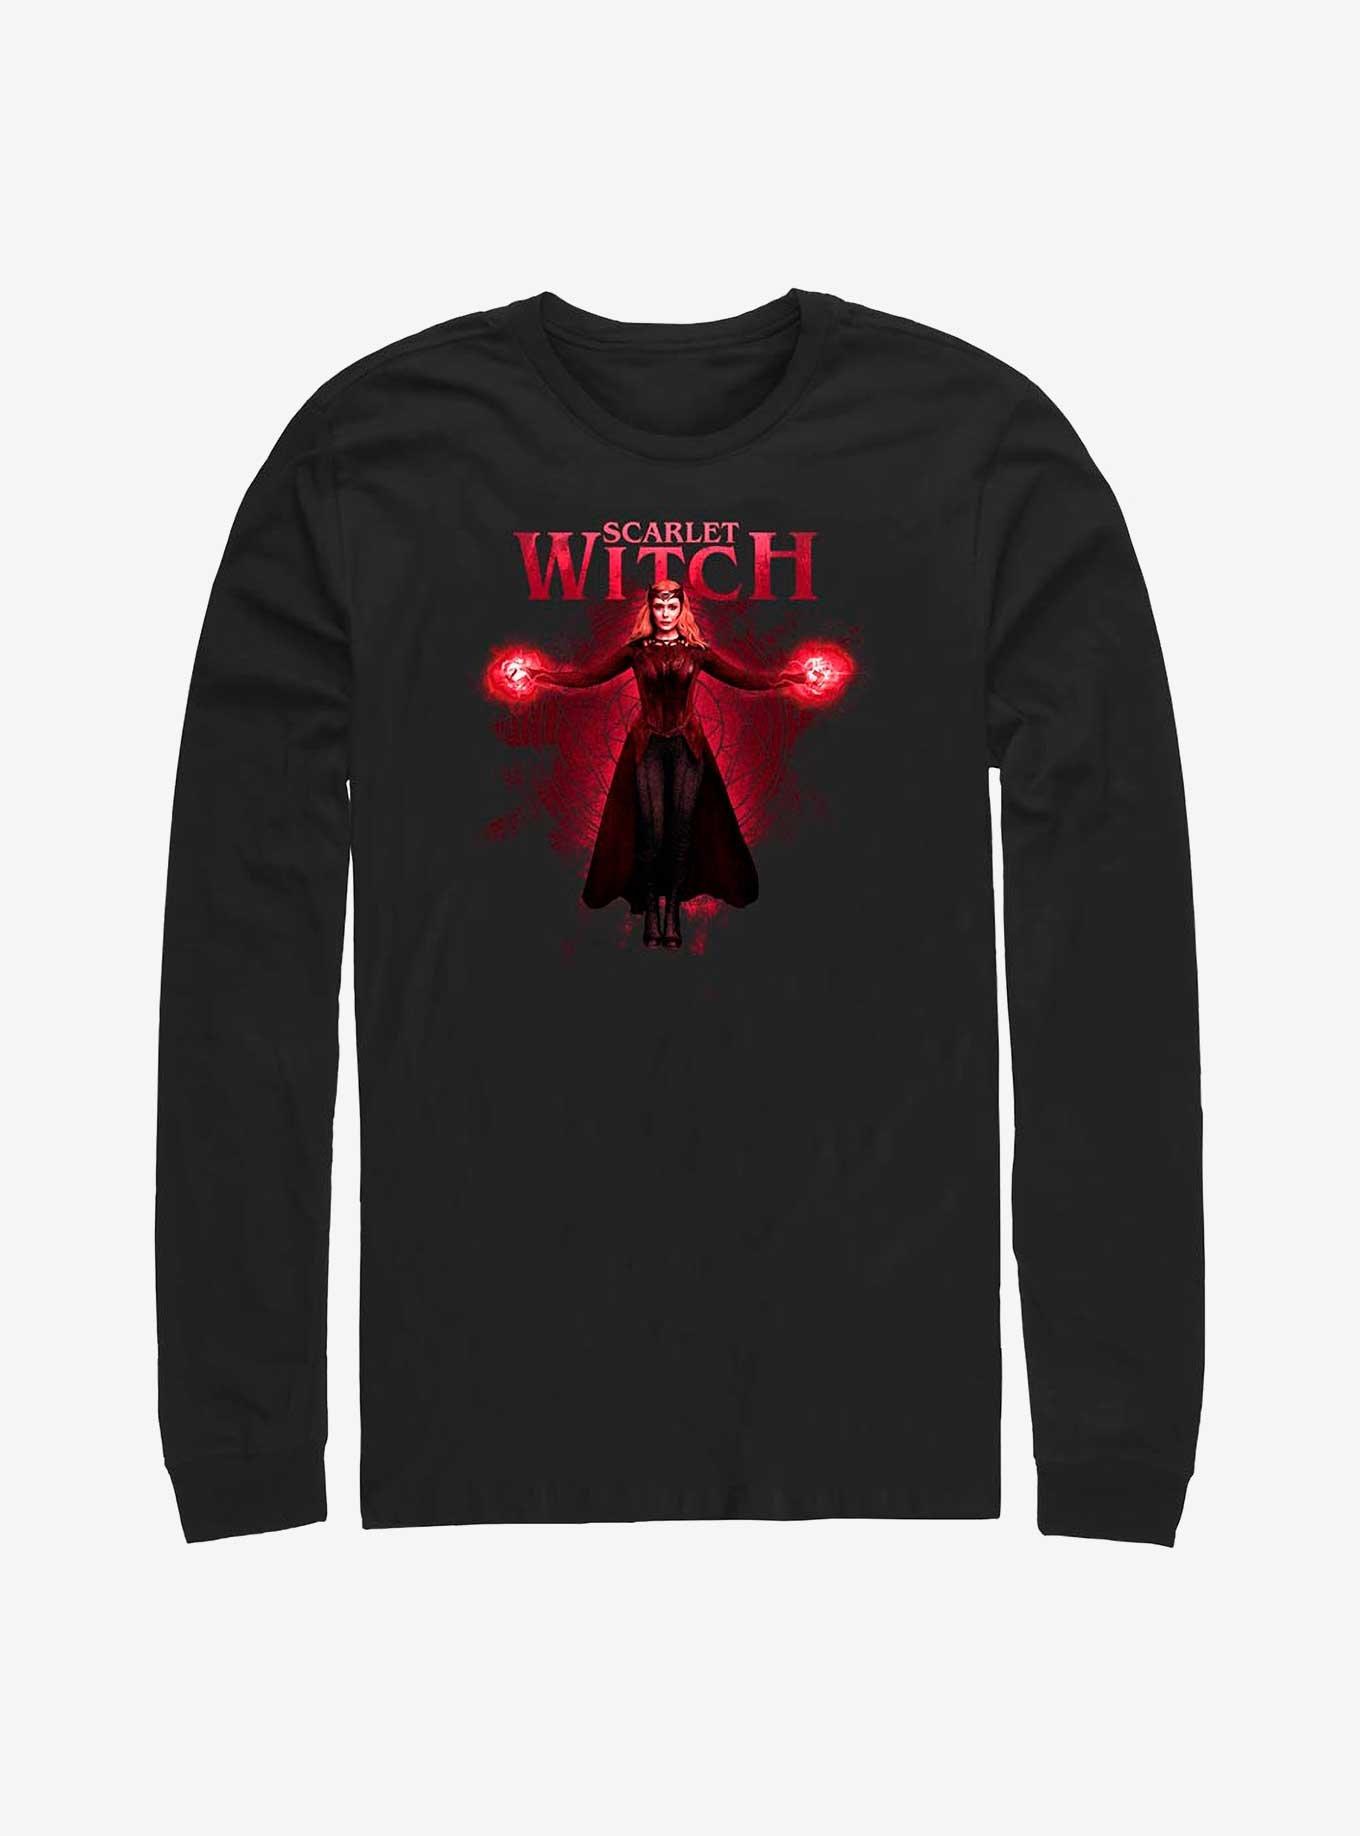 Marvel Doctor Strange in the Multiverse of Madness Scarlet Witch Long-Sleeve T-Shirt, BLACK, hi-res